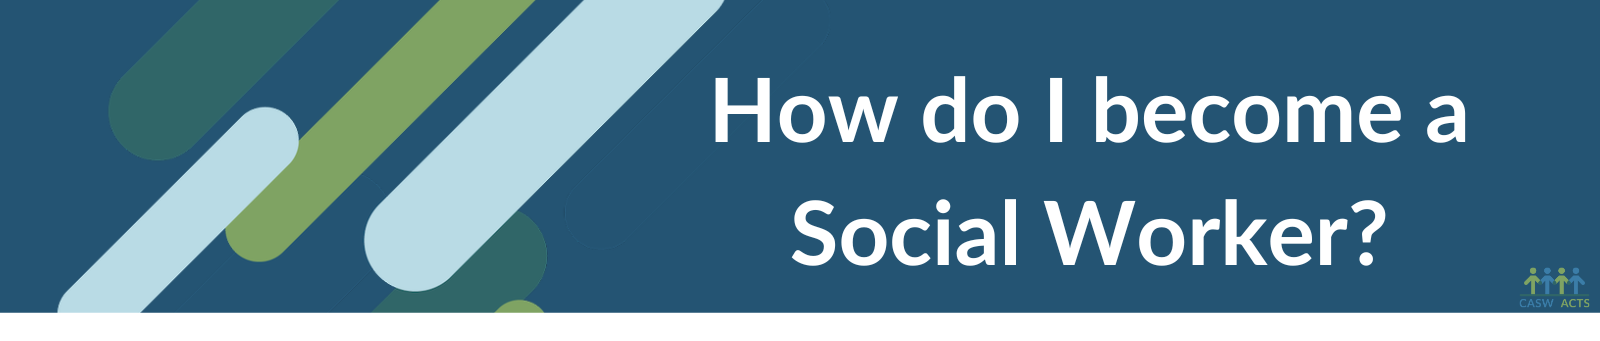 How do I become a Social Worker? | Canadian Association of Social Workers